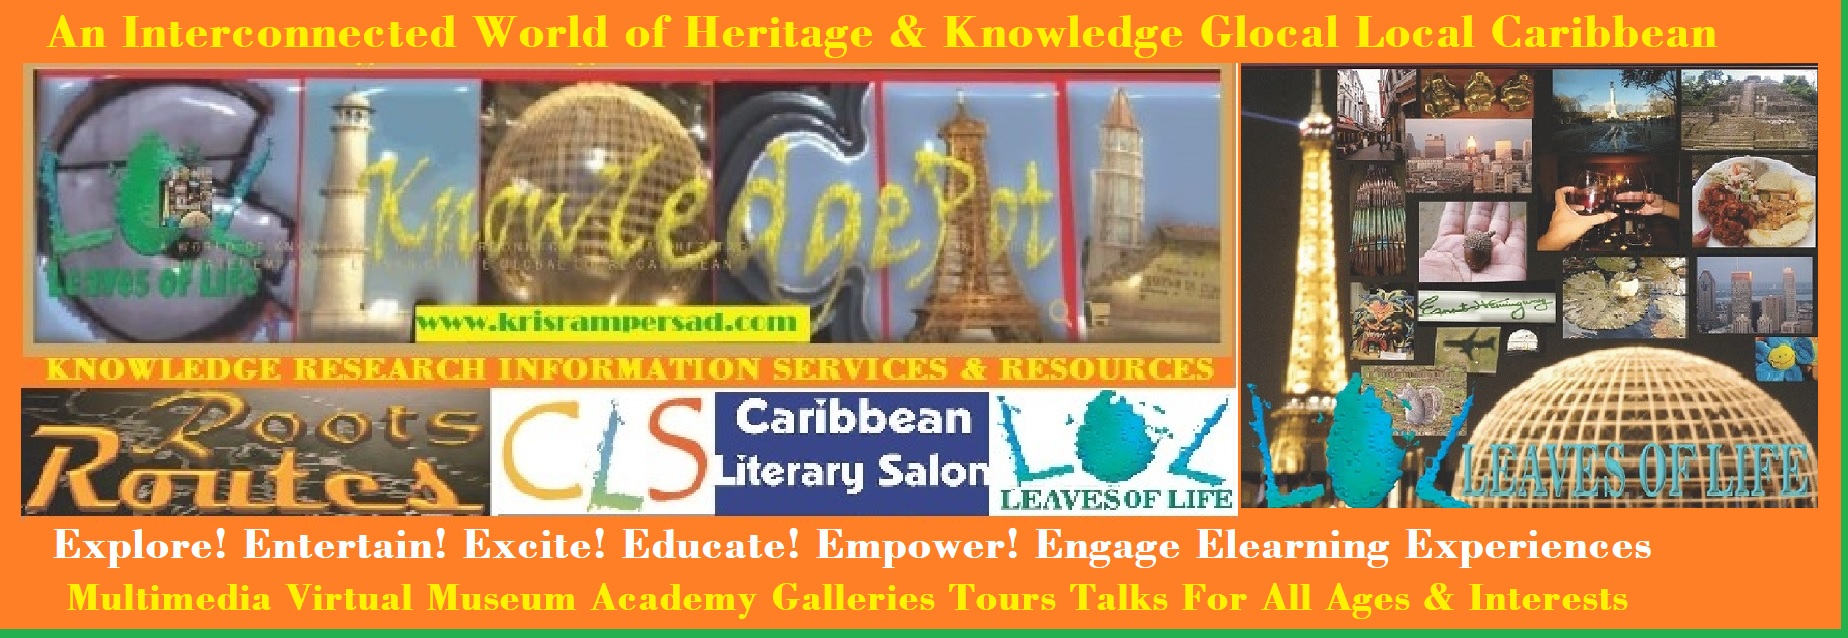 GloCal Knowledge Pot Knowledge Research Information Services & Resources with Dr Kris Rampersad